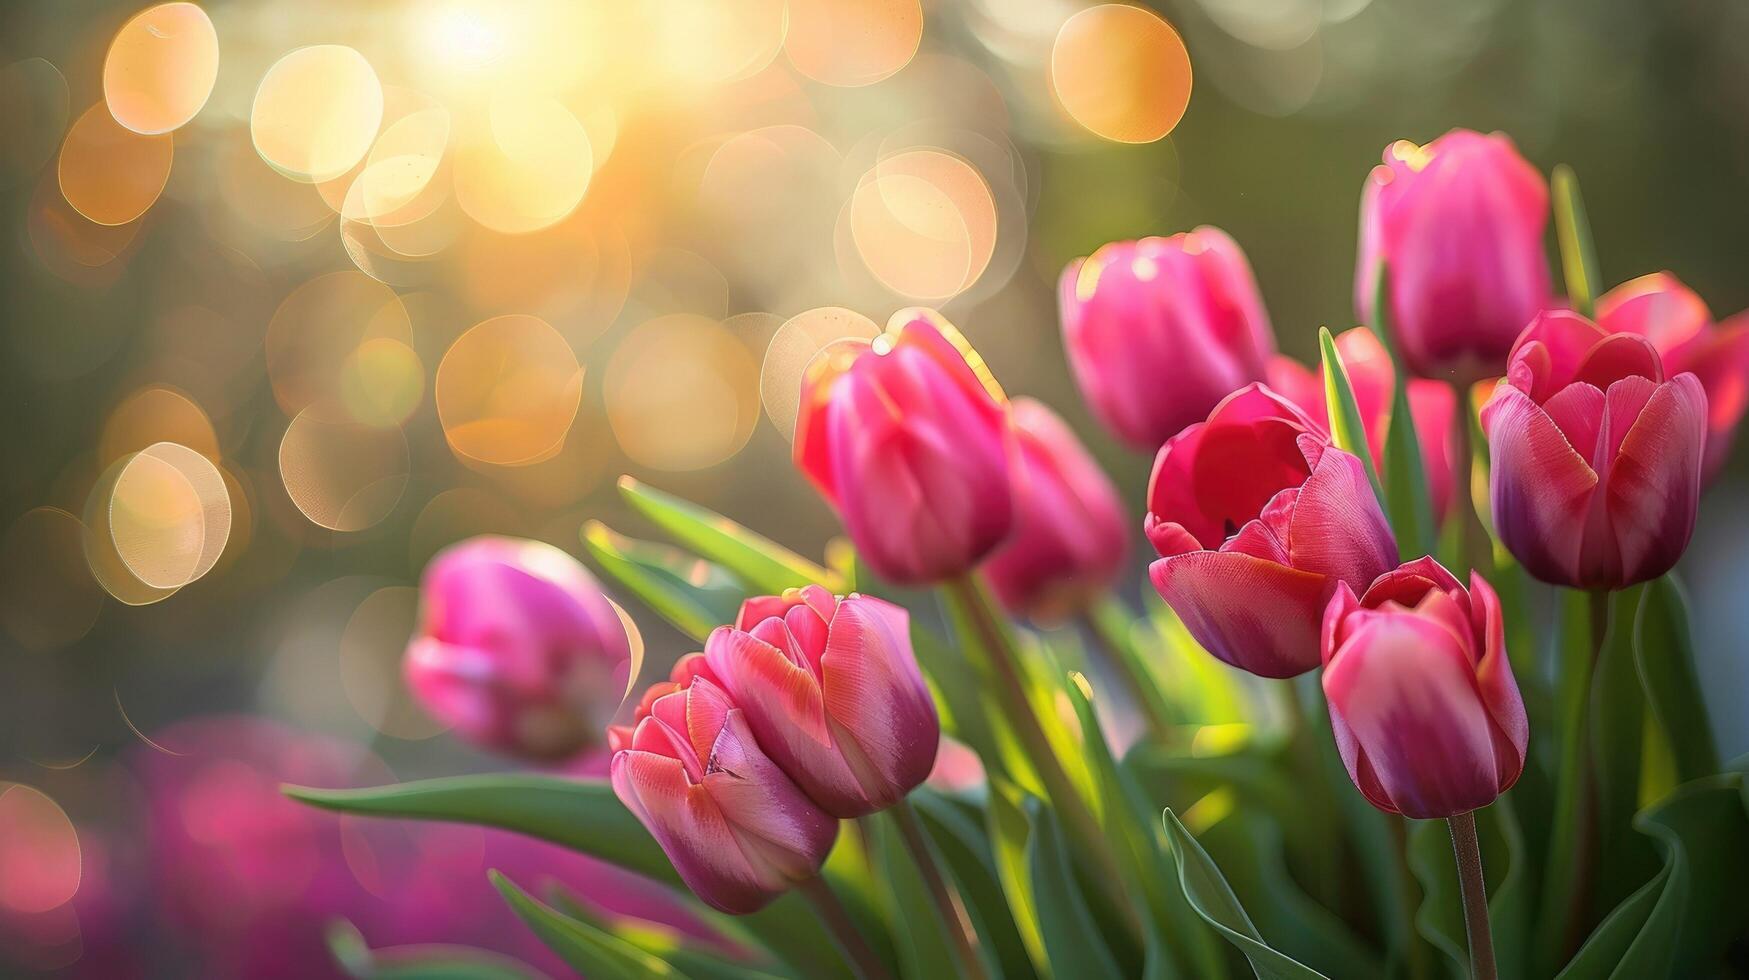 Vibrant pink tulips in bloom with soft sunlight and bokeh background. photo